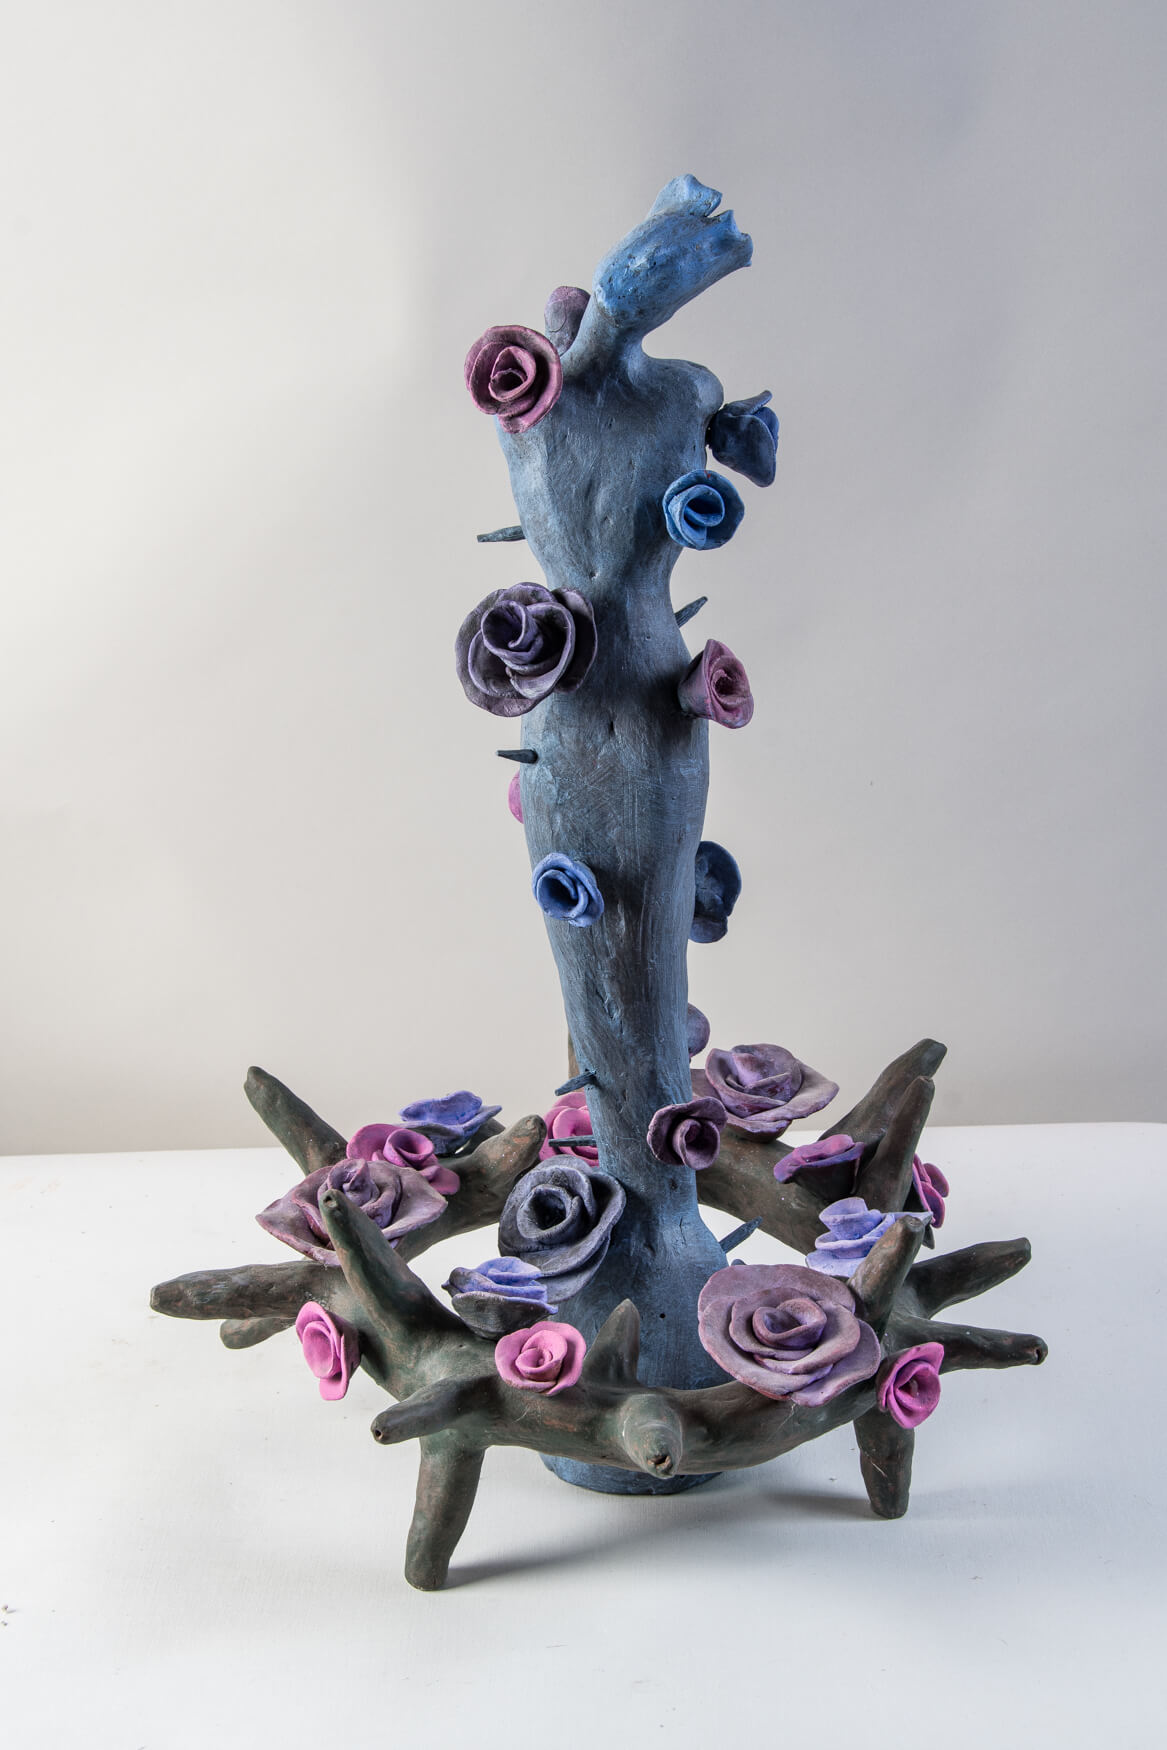 Twilight is mixed media on low fired clay. It has a brown crown of thorns covered with blue, purple, and pink flowers with a blue human figure rising vertically from the center that is also covered in flowers and thorns.